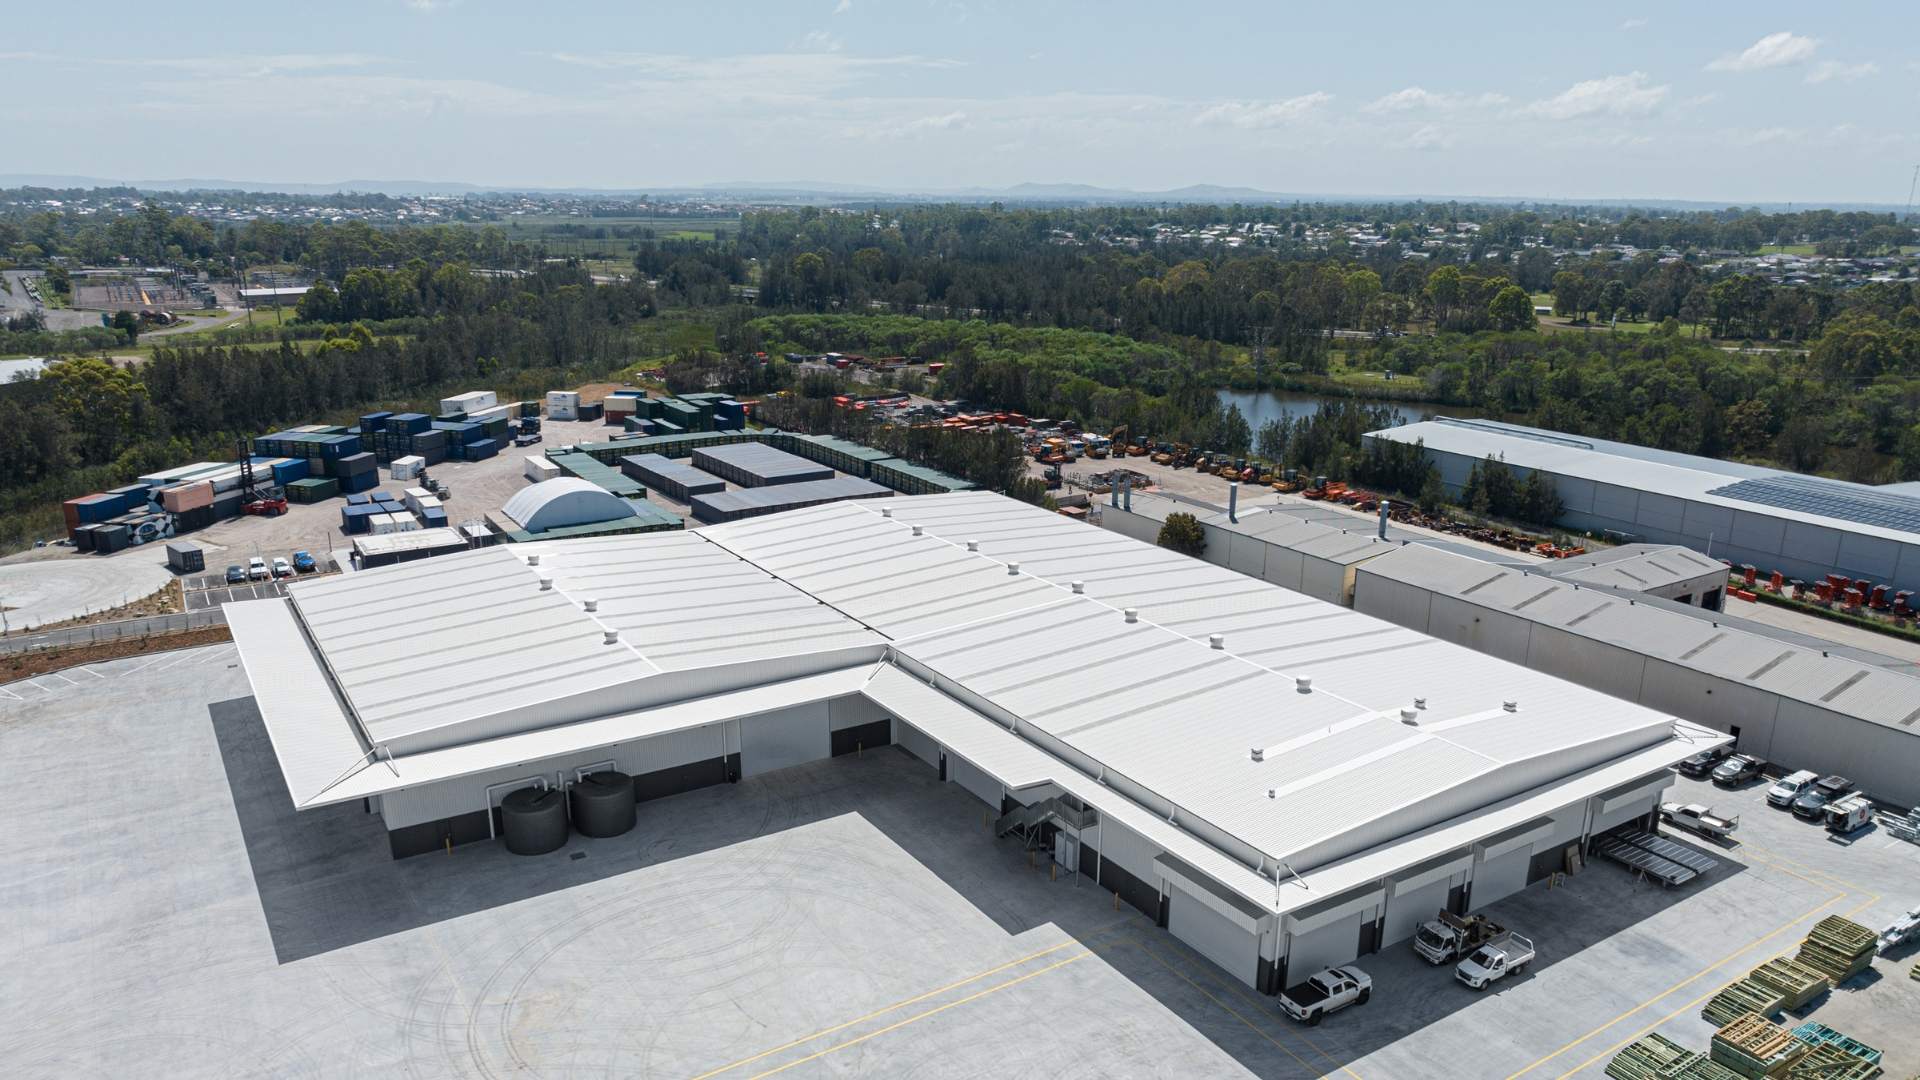 Crossmuller's Completion of Large Scale Timber Manufacturing Facility